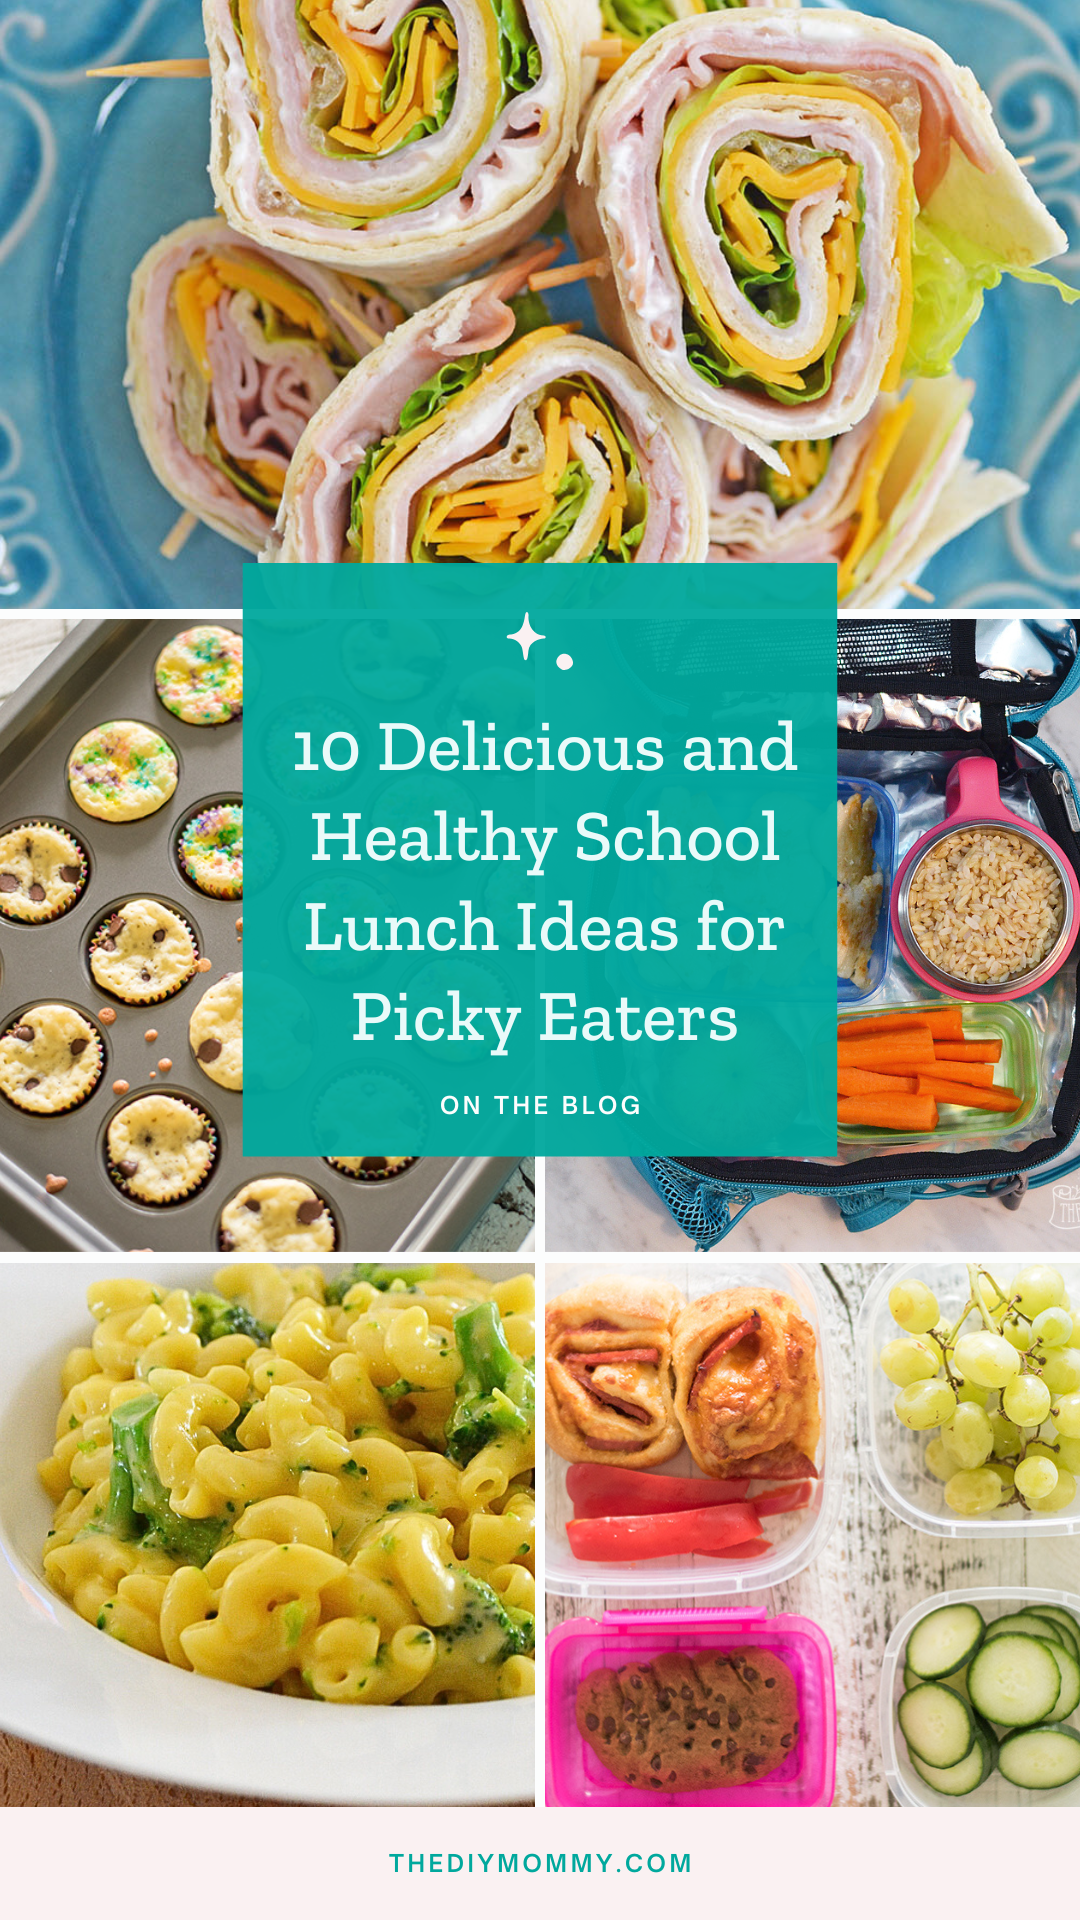 10 Delicious & Healthy School Lunch Ideas for Picky Eaters